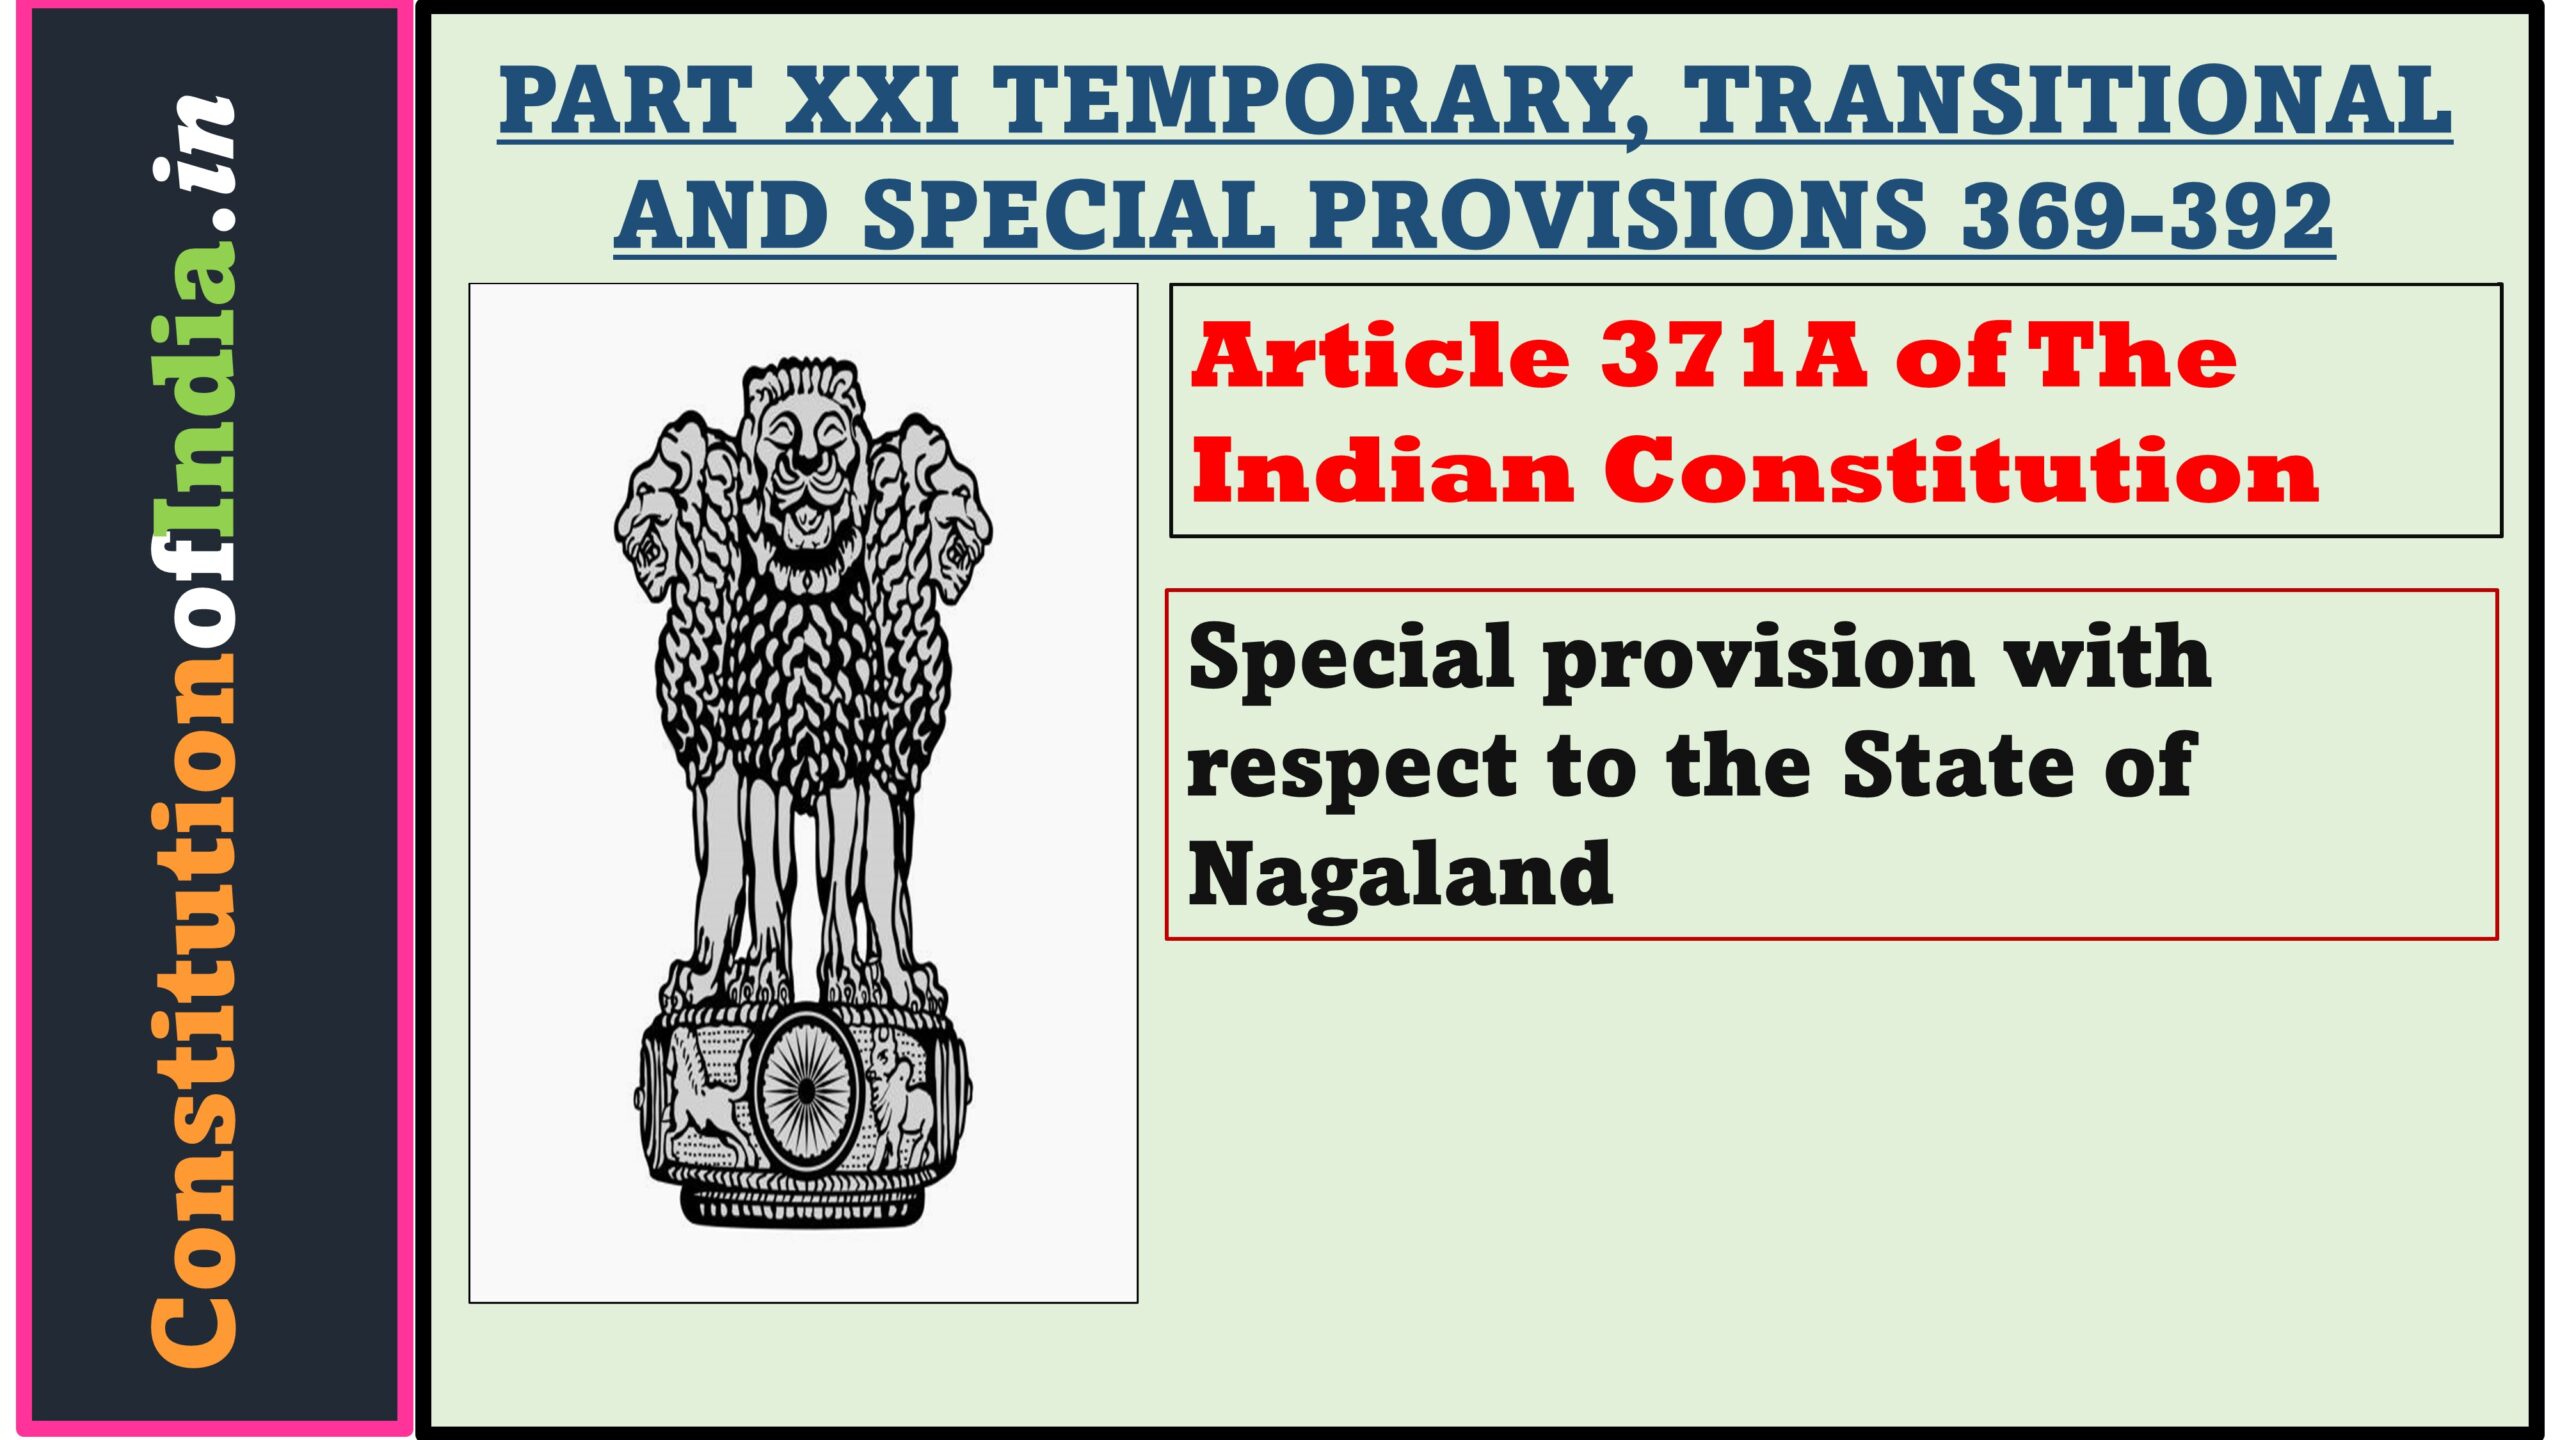 Article 371A of The Indian Constitution